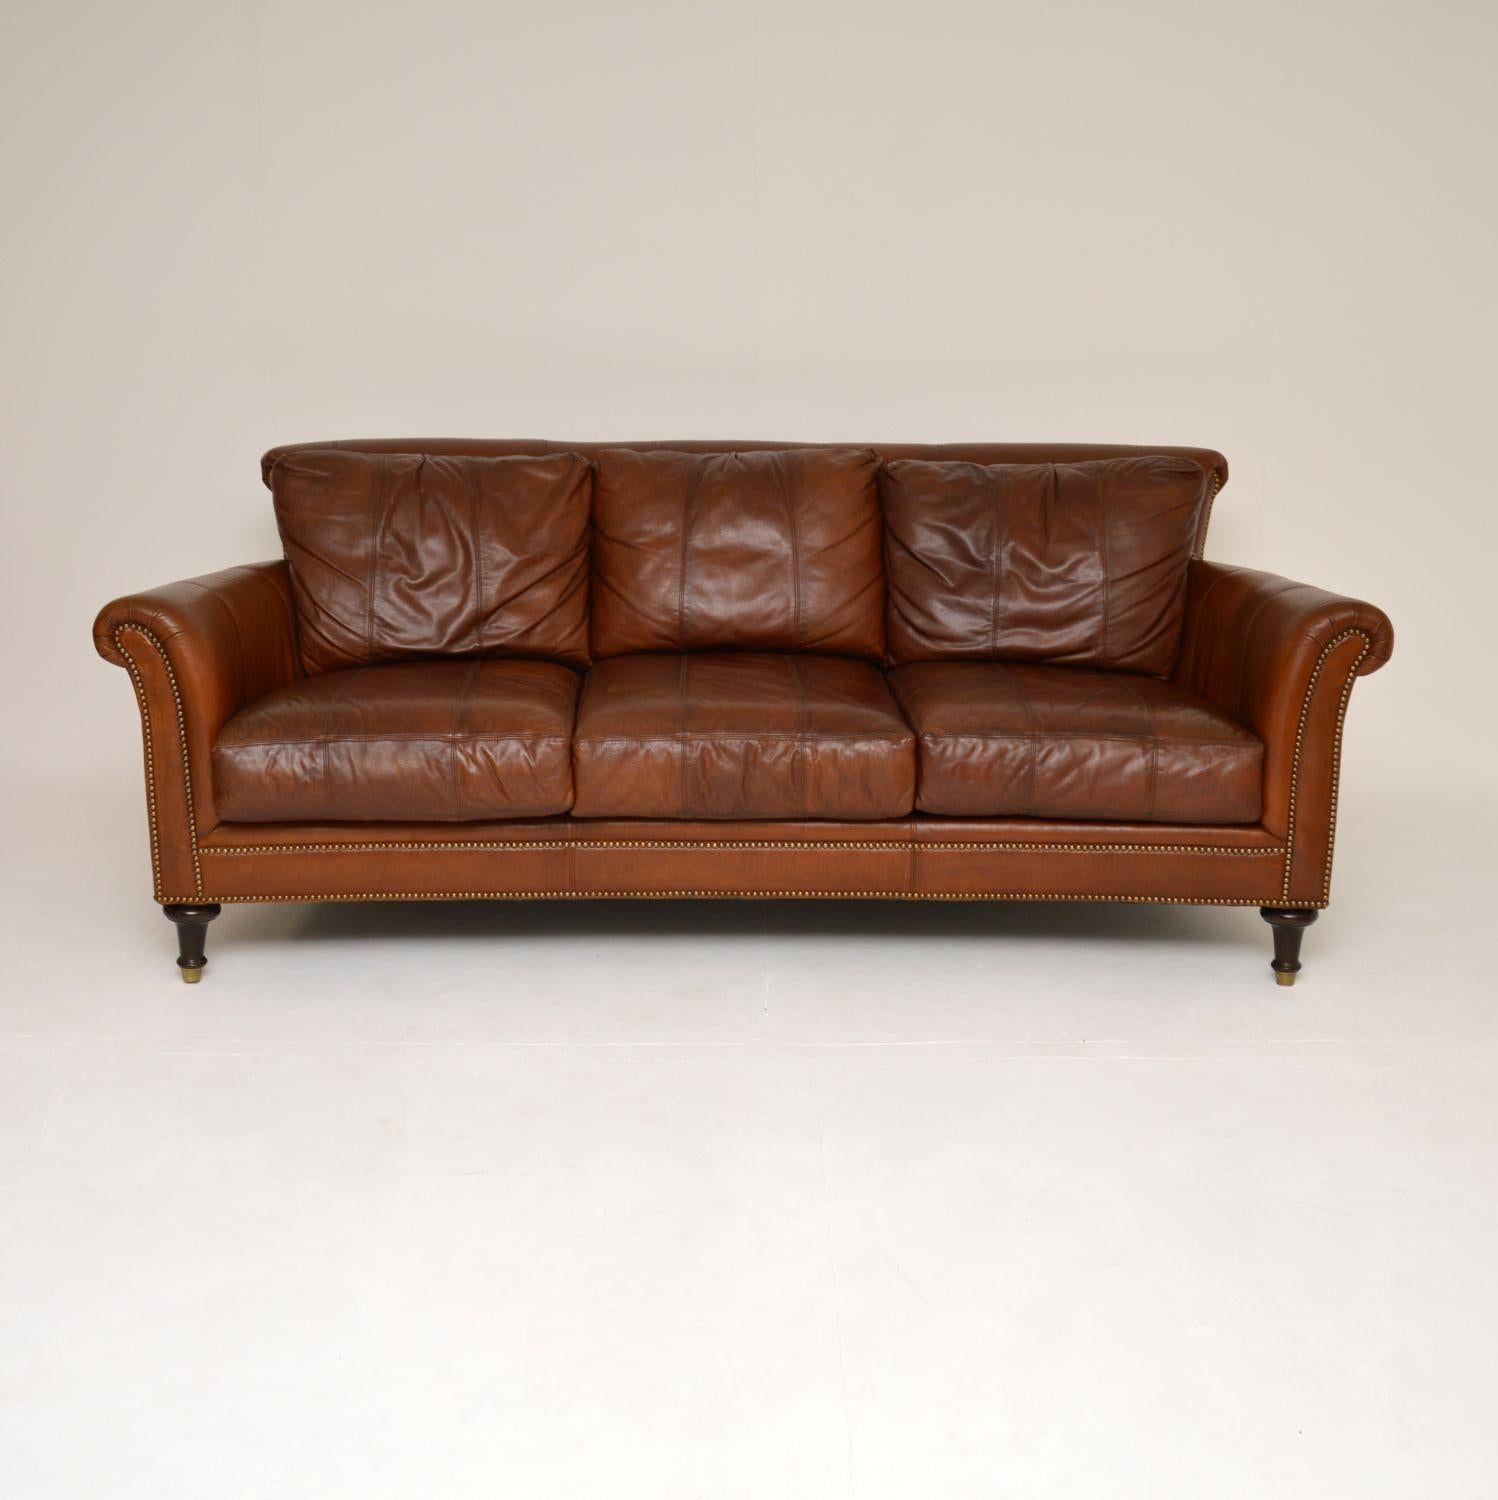 A fantastic vintage leather sofa, by high end American manufacturer Ferguson Copeland. This was made in the USA, it dates from around the late 20th century.

It is of magnificent quality, it is of very generous proportions and is extremely